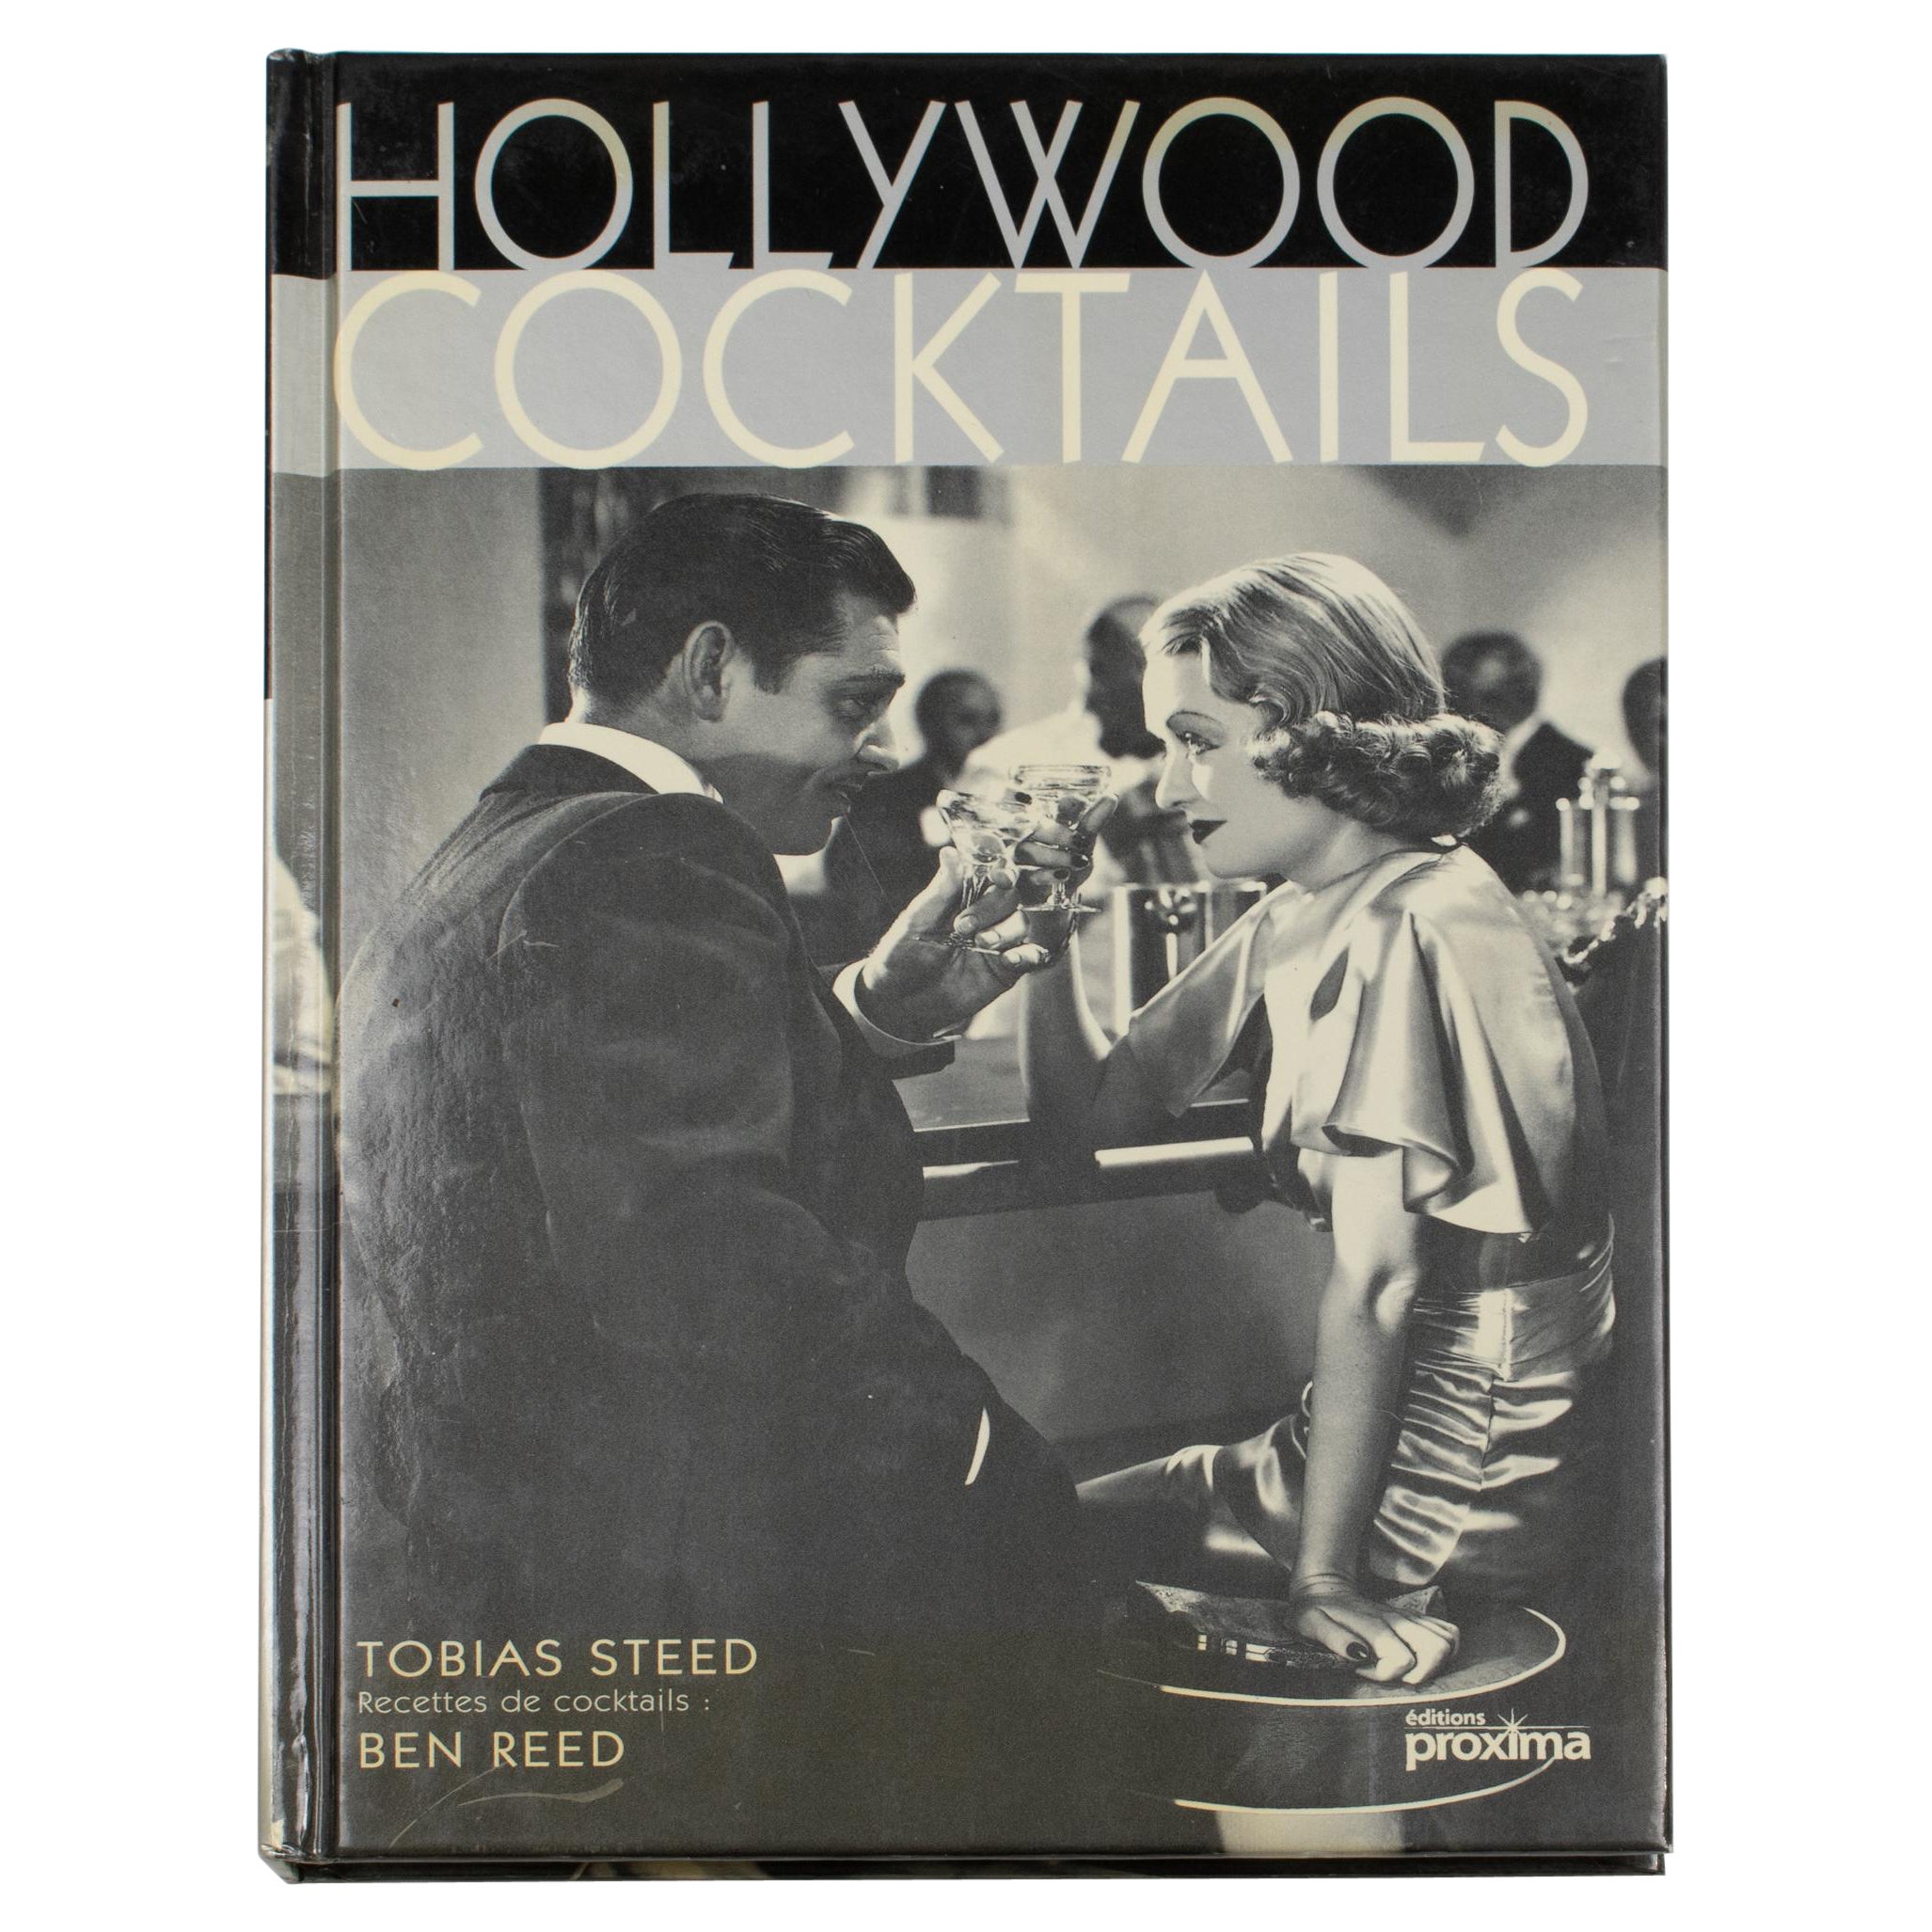 Hollywood Cocktails Book by Tobias Steed, French Edition, 2000